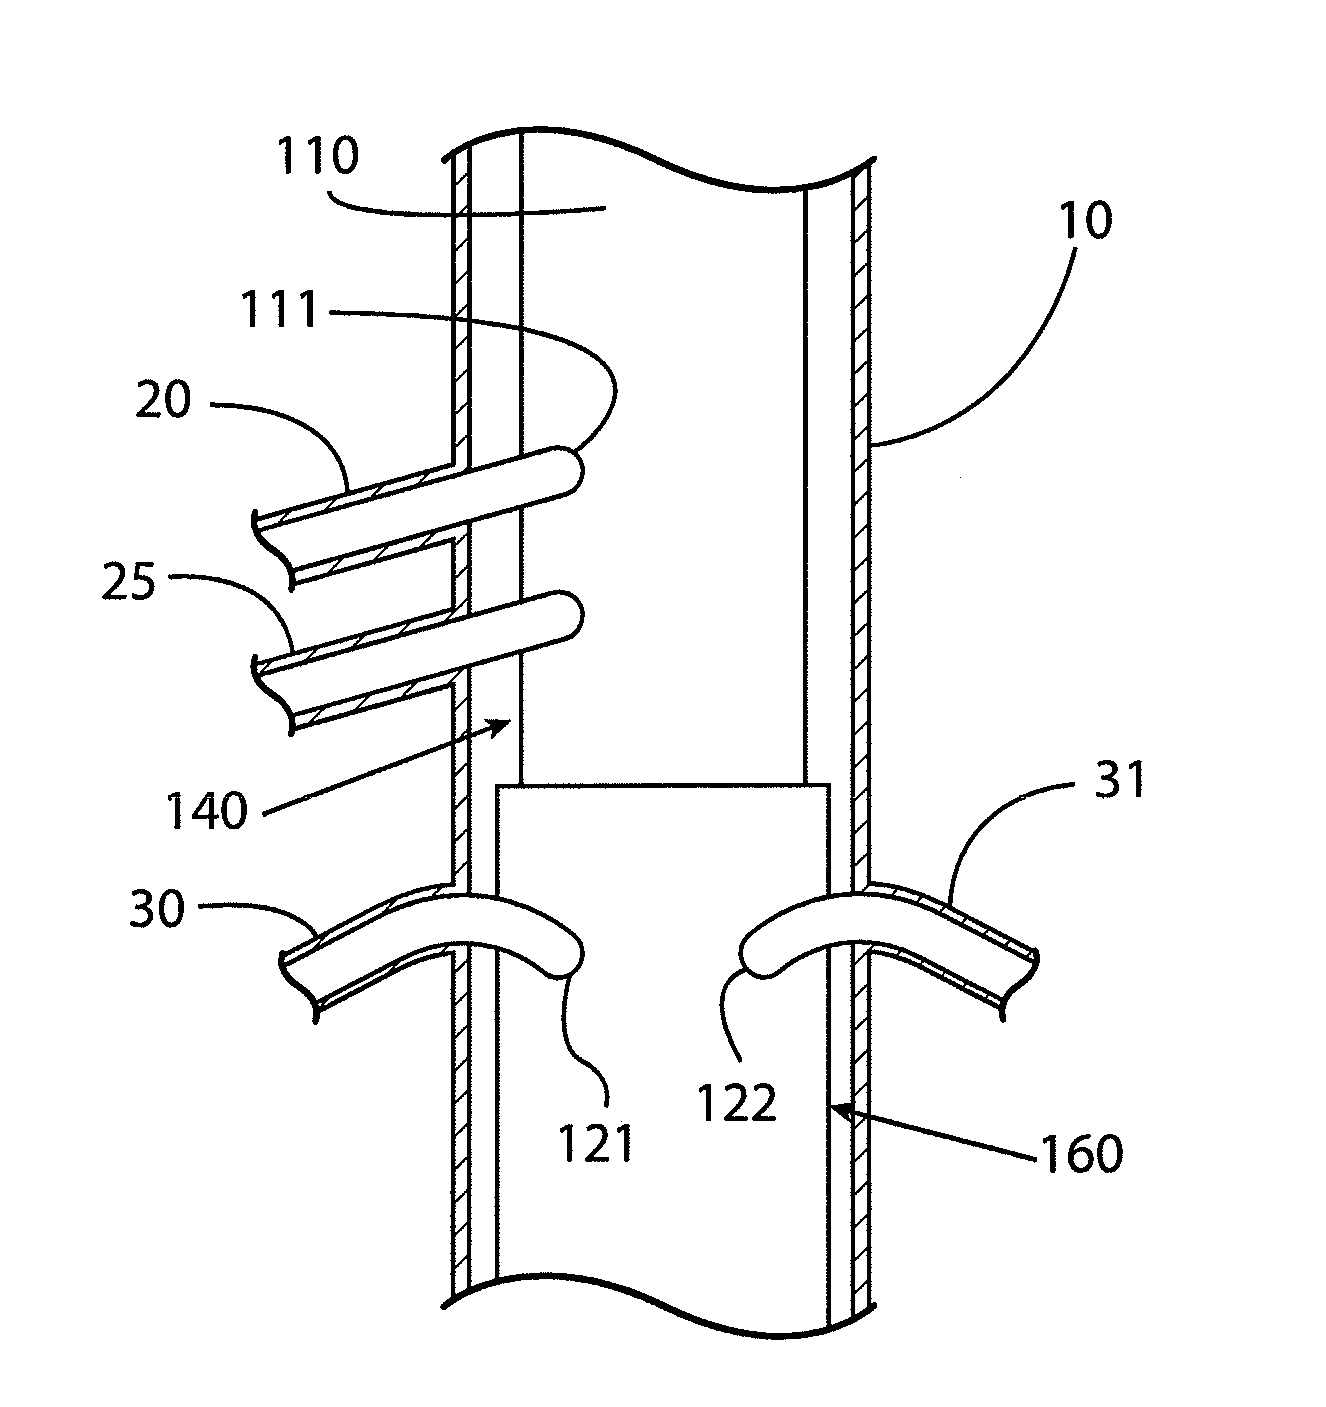 Method and apparatus for endovascular therapy of aortic pathology